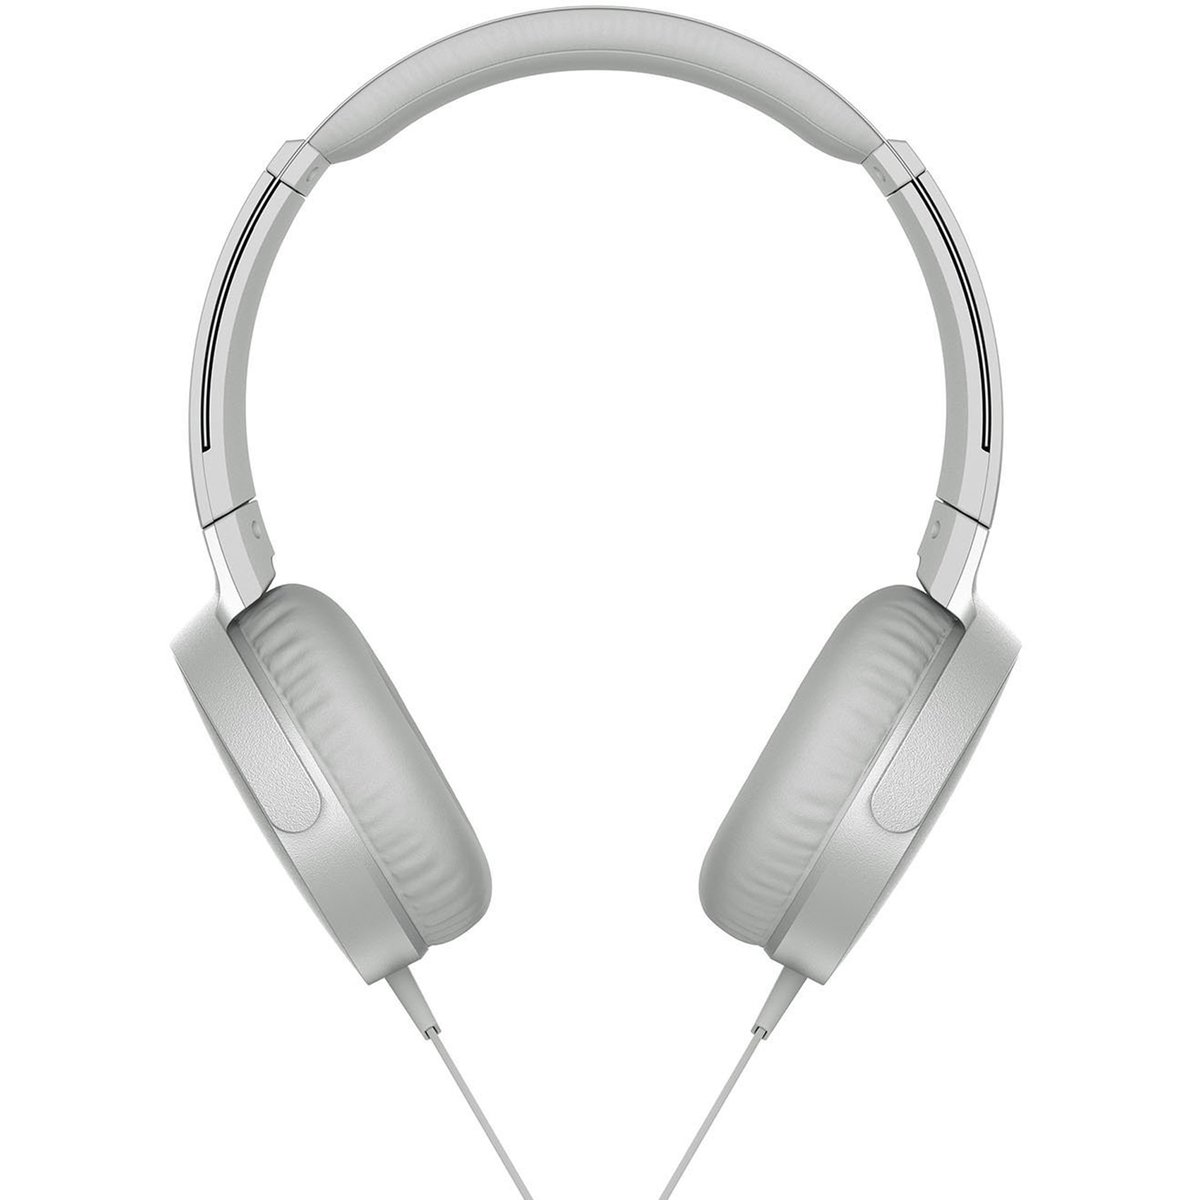 Sony Headphone With Mic MDR-XB550AP White